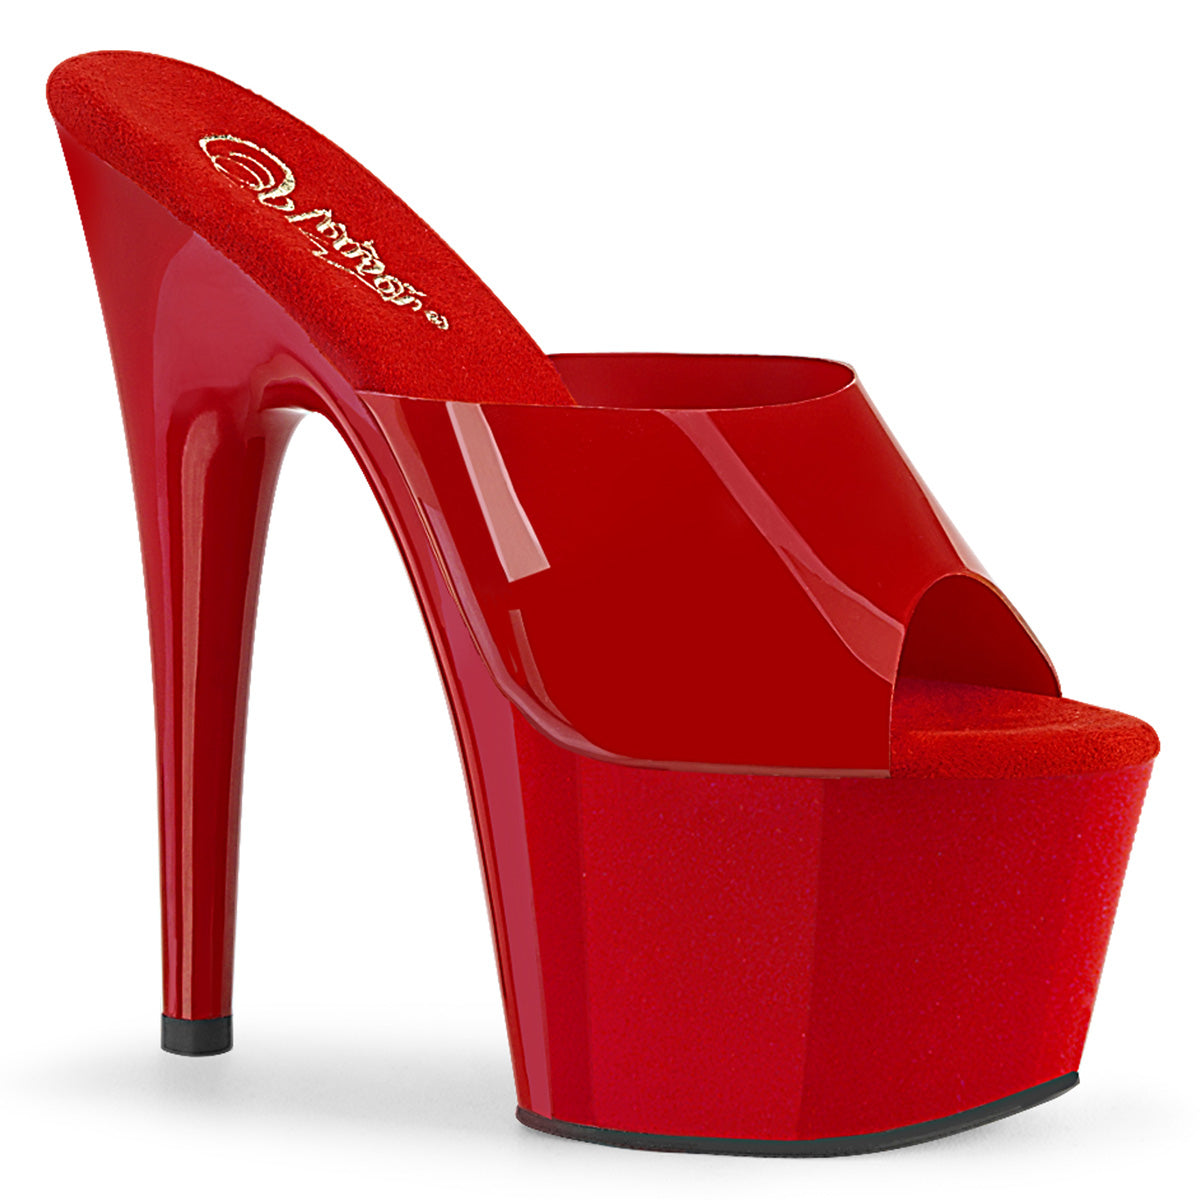 ADORE-701N Pleaser 7 Inch Heel Red Pole Dancing Shoes-Pleaser- Sexy Shoes